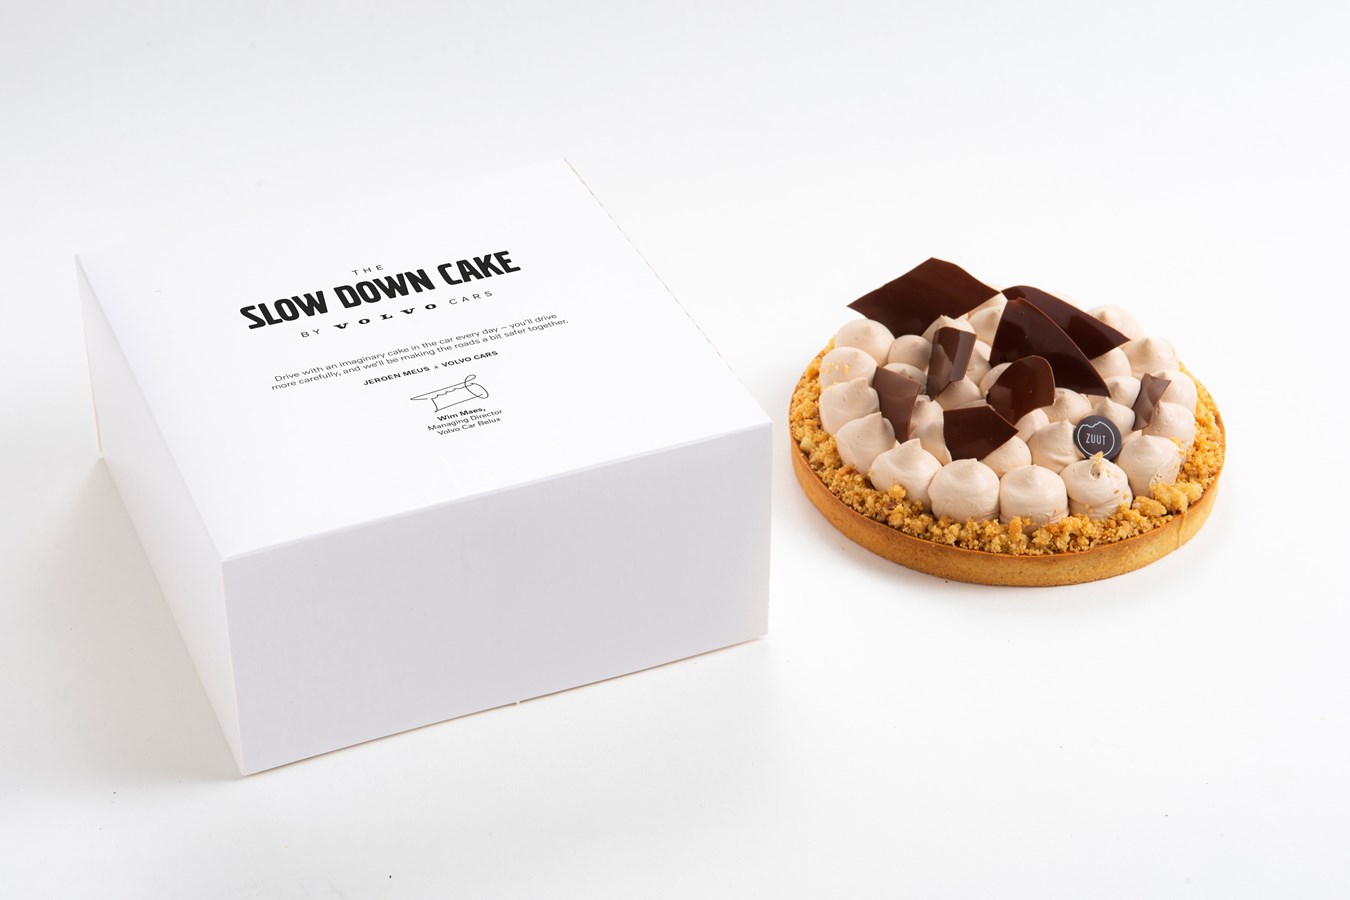 Slow Down Cake by Volvo Cars